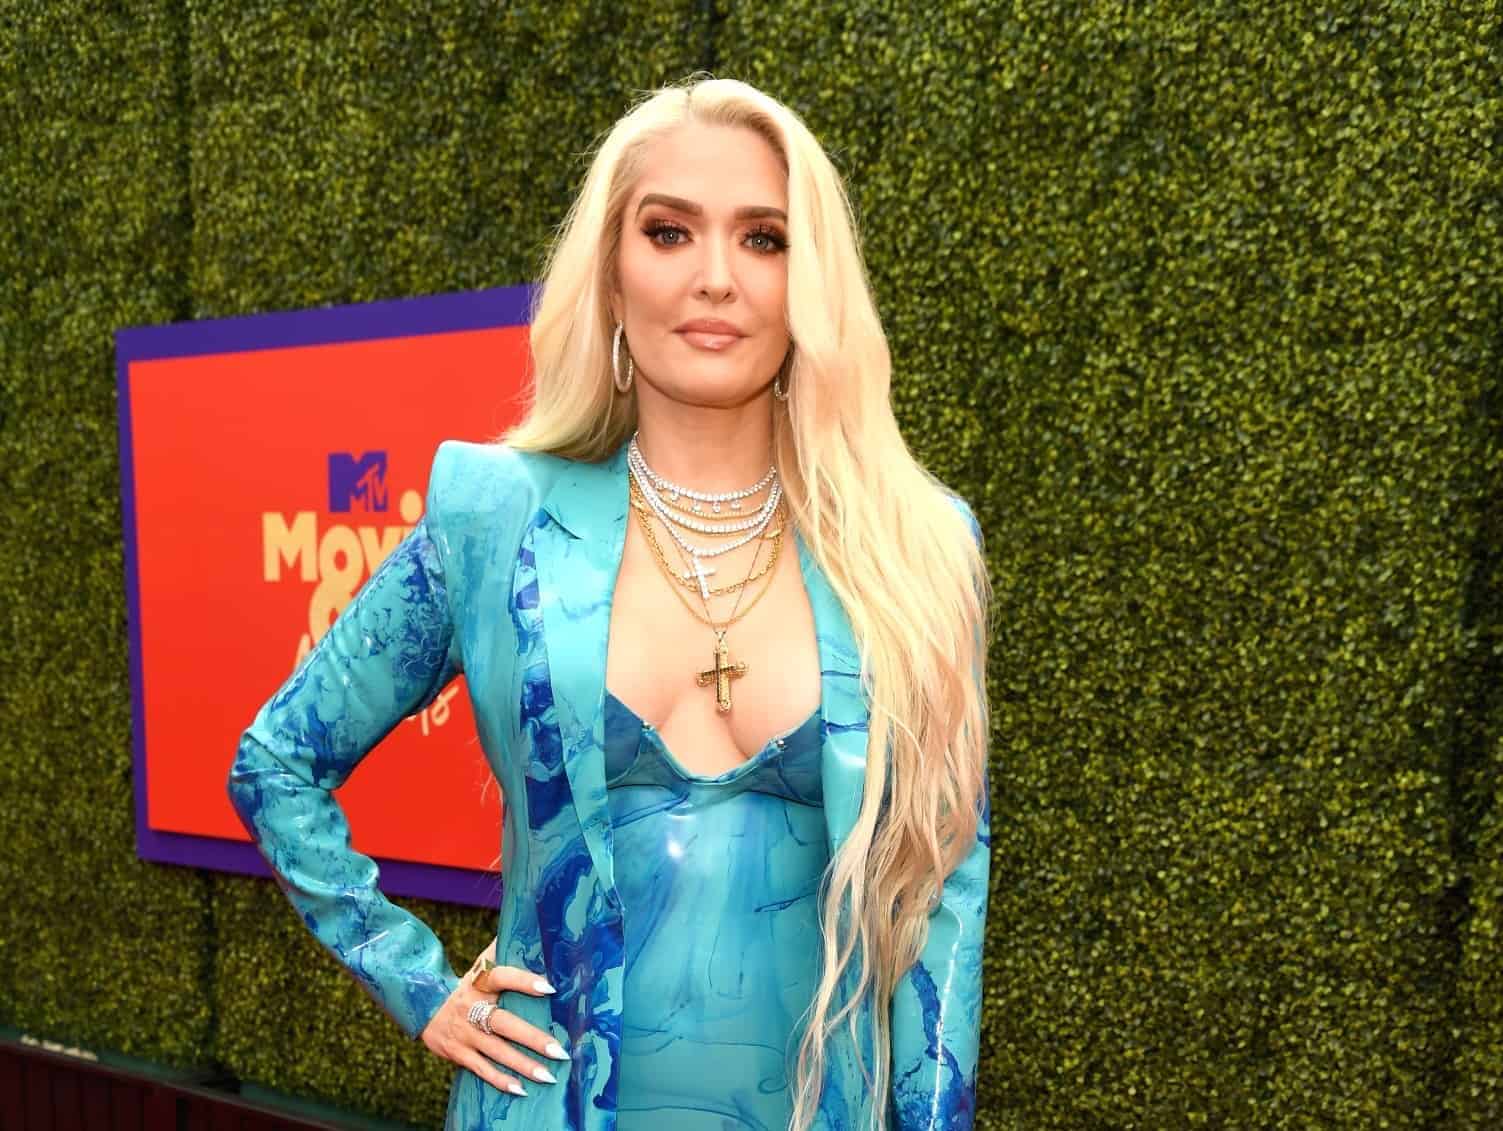 RHOBH's Erika Jayne Targets the Mental Health of Attorney Investigating Her Finances, Says He Needs Lexapro and Claims He's "Unraveling"